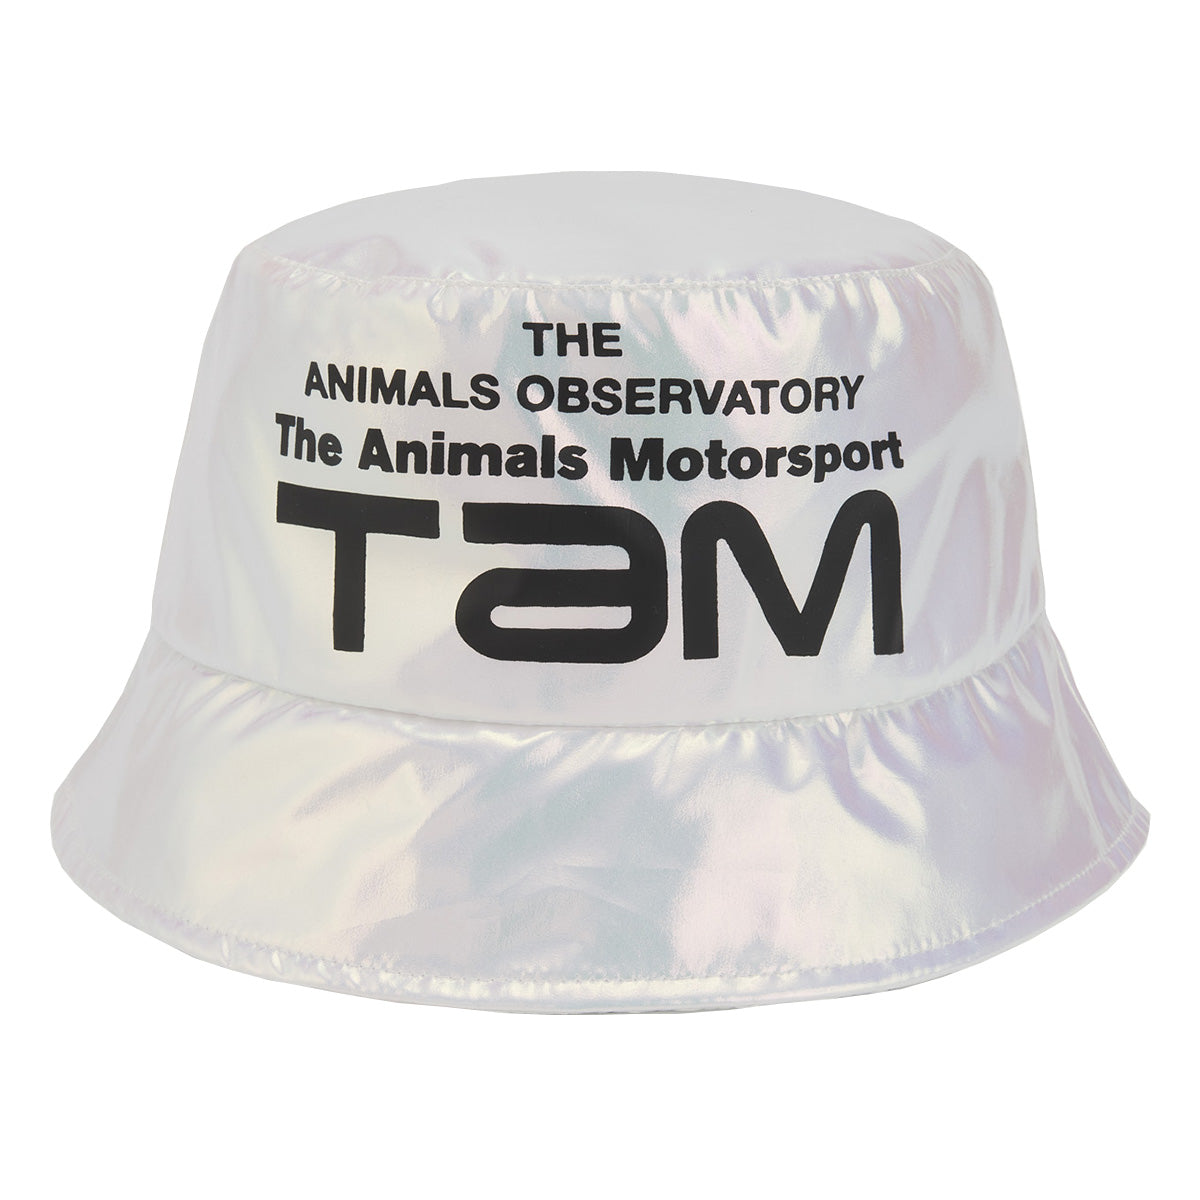 The Starfish Bucket Hat from The Animals Observatory features a vintage-inspired motorsport